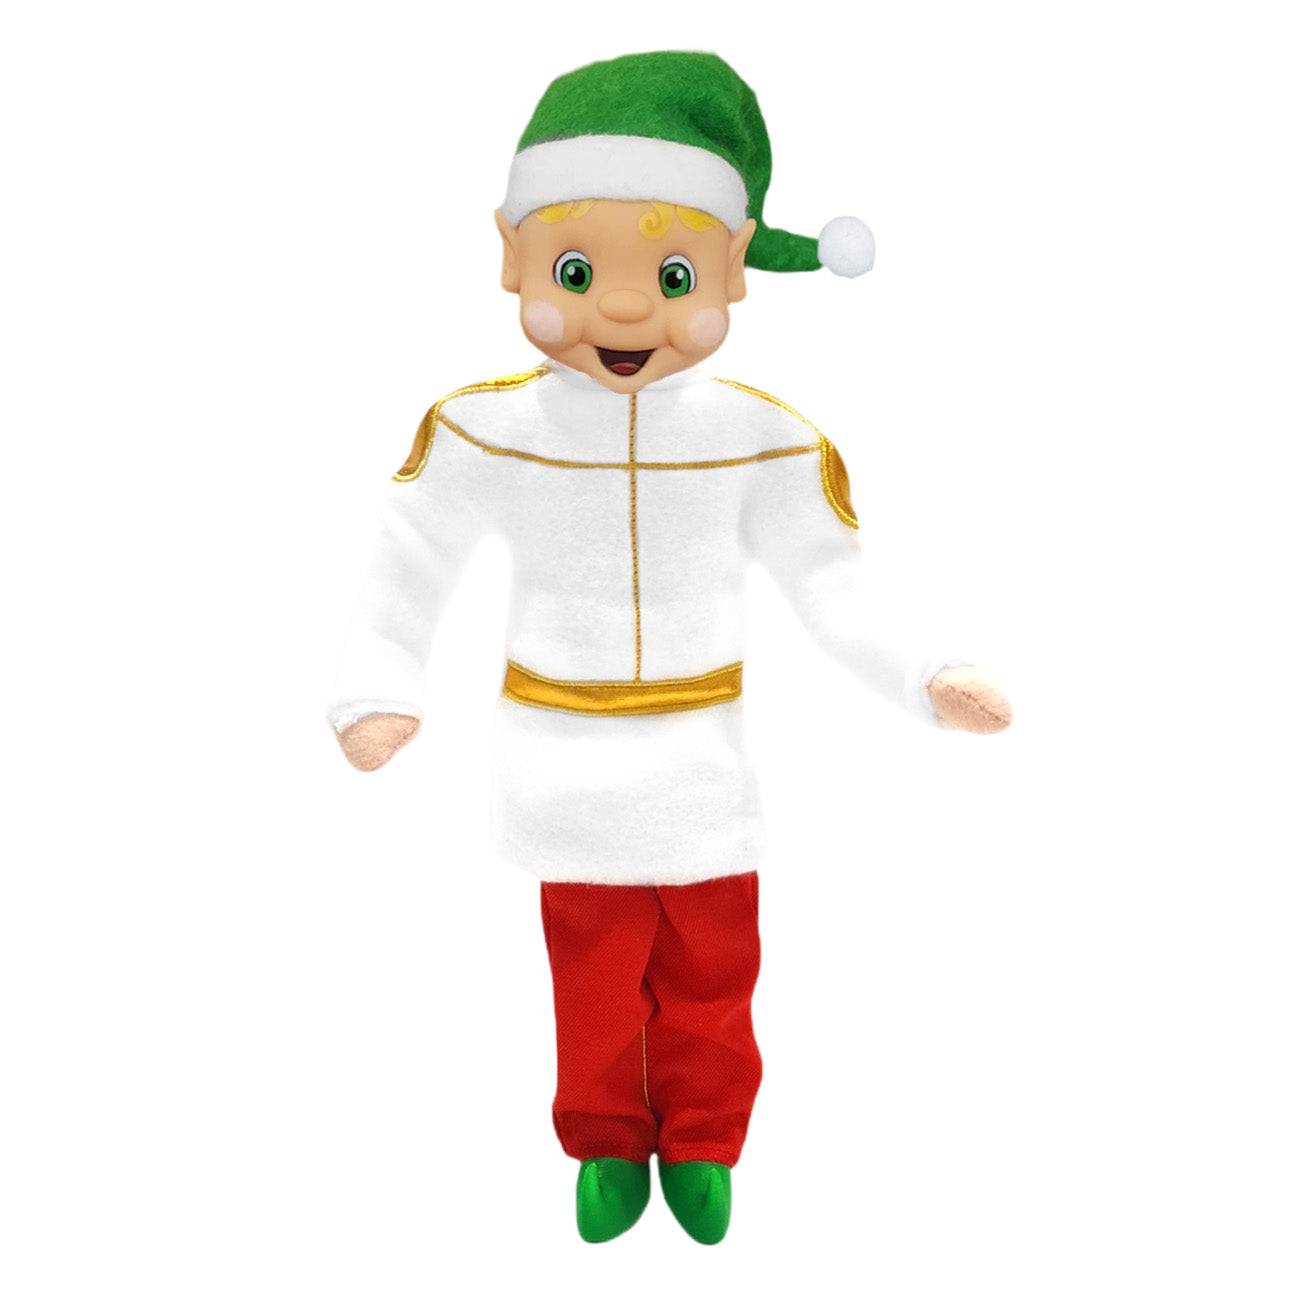 Elf wearing a prince costume